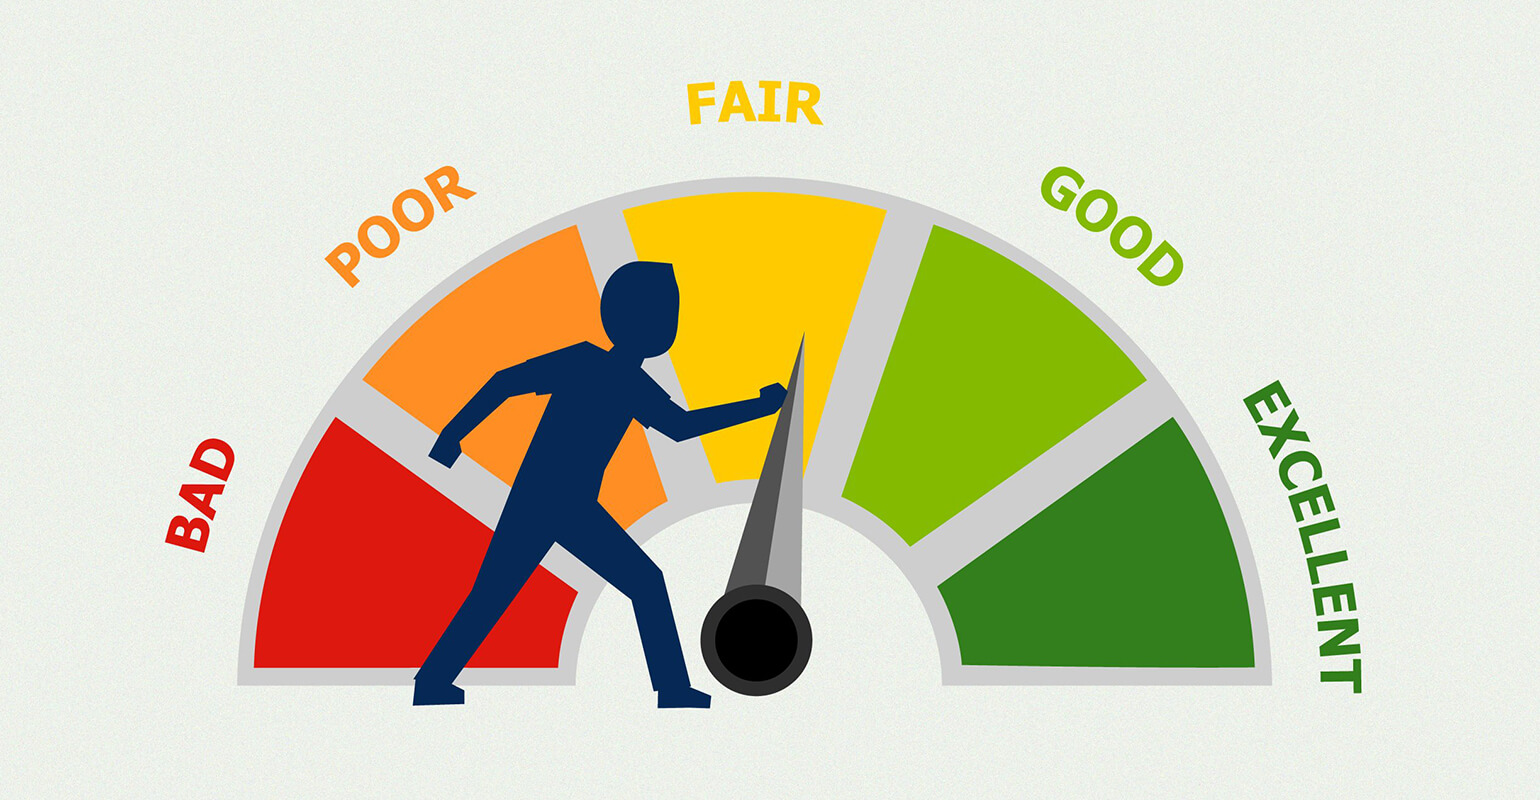 Cartoon image of a scale labeled bad in red, poor in orange, fair in yellow, good in green, and excellent in dark green. A cartoon person is pushing the scale reader from fair towards good.